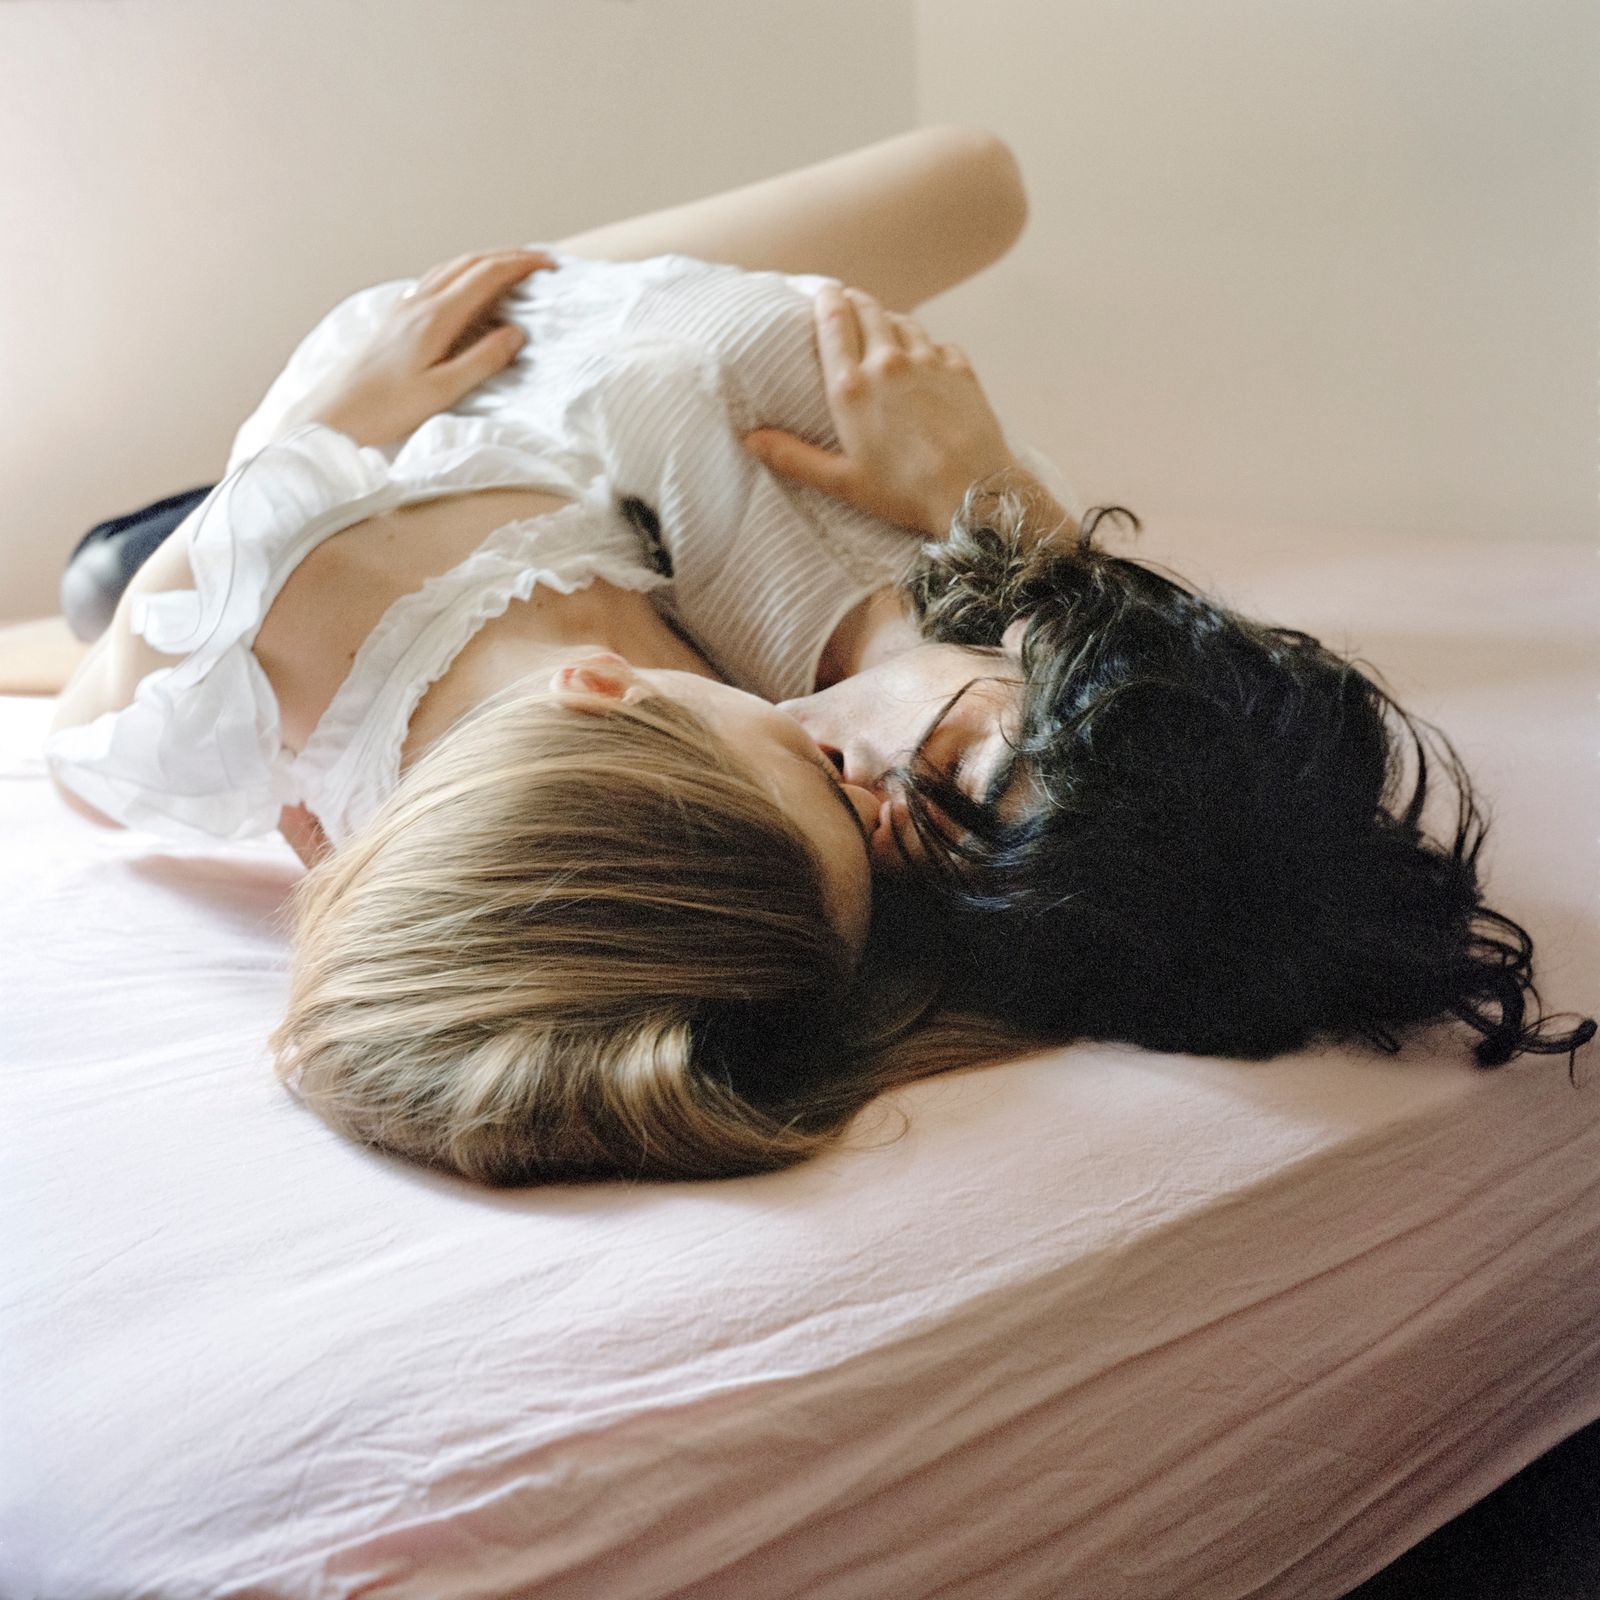 © Federica Sasso - Image from the Post-Adolescence photography project